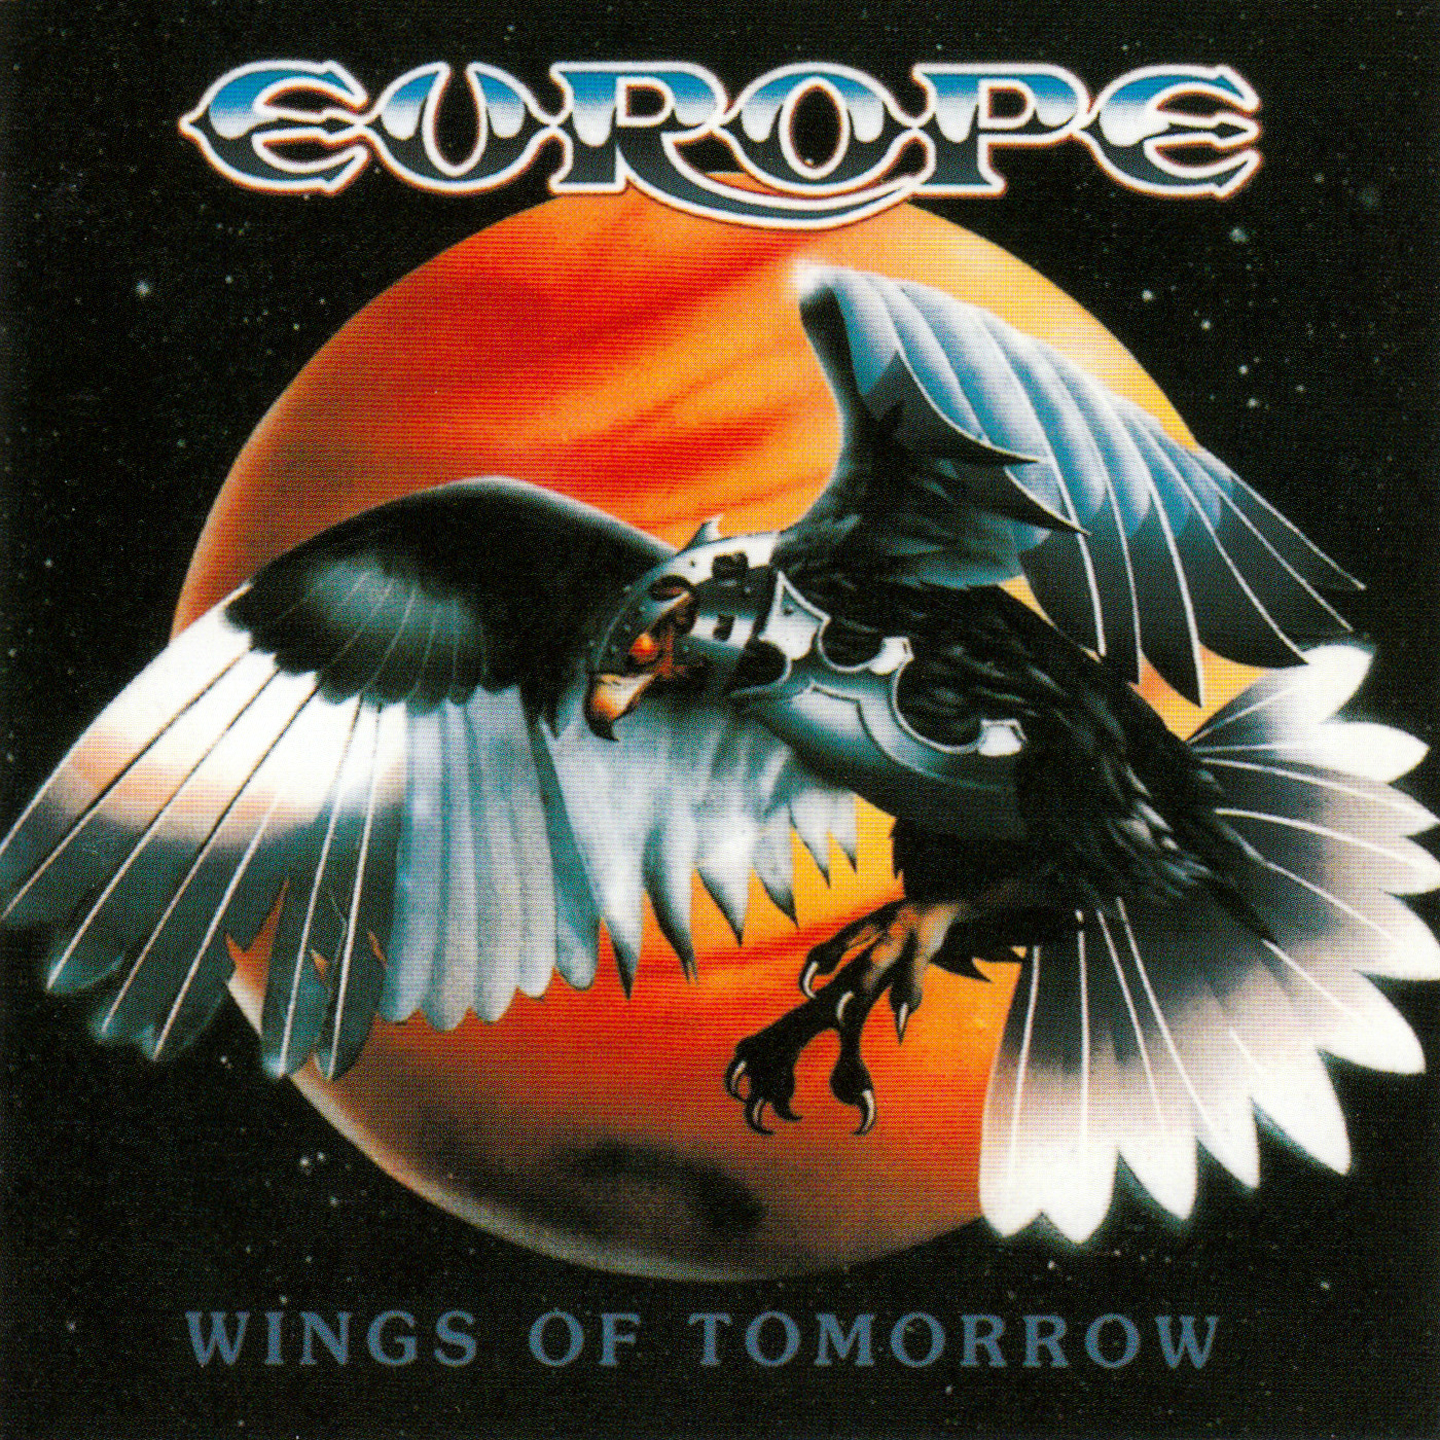  Europe Wings Of Tomorrow  Front JPN CD Covers Cover 